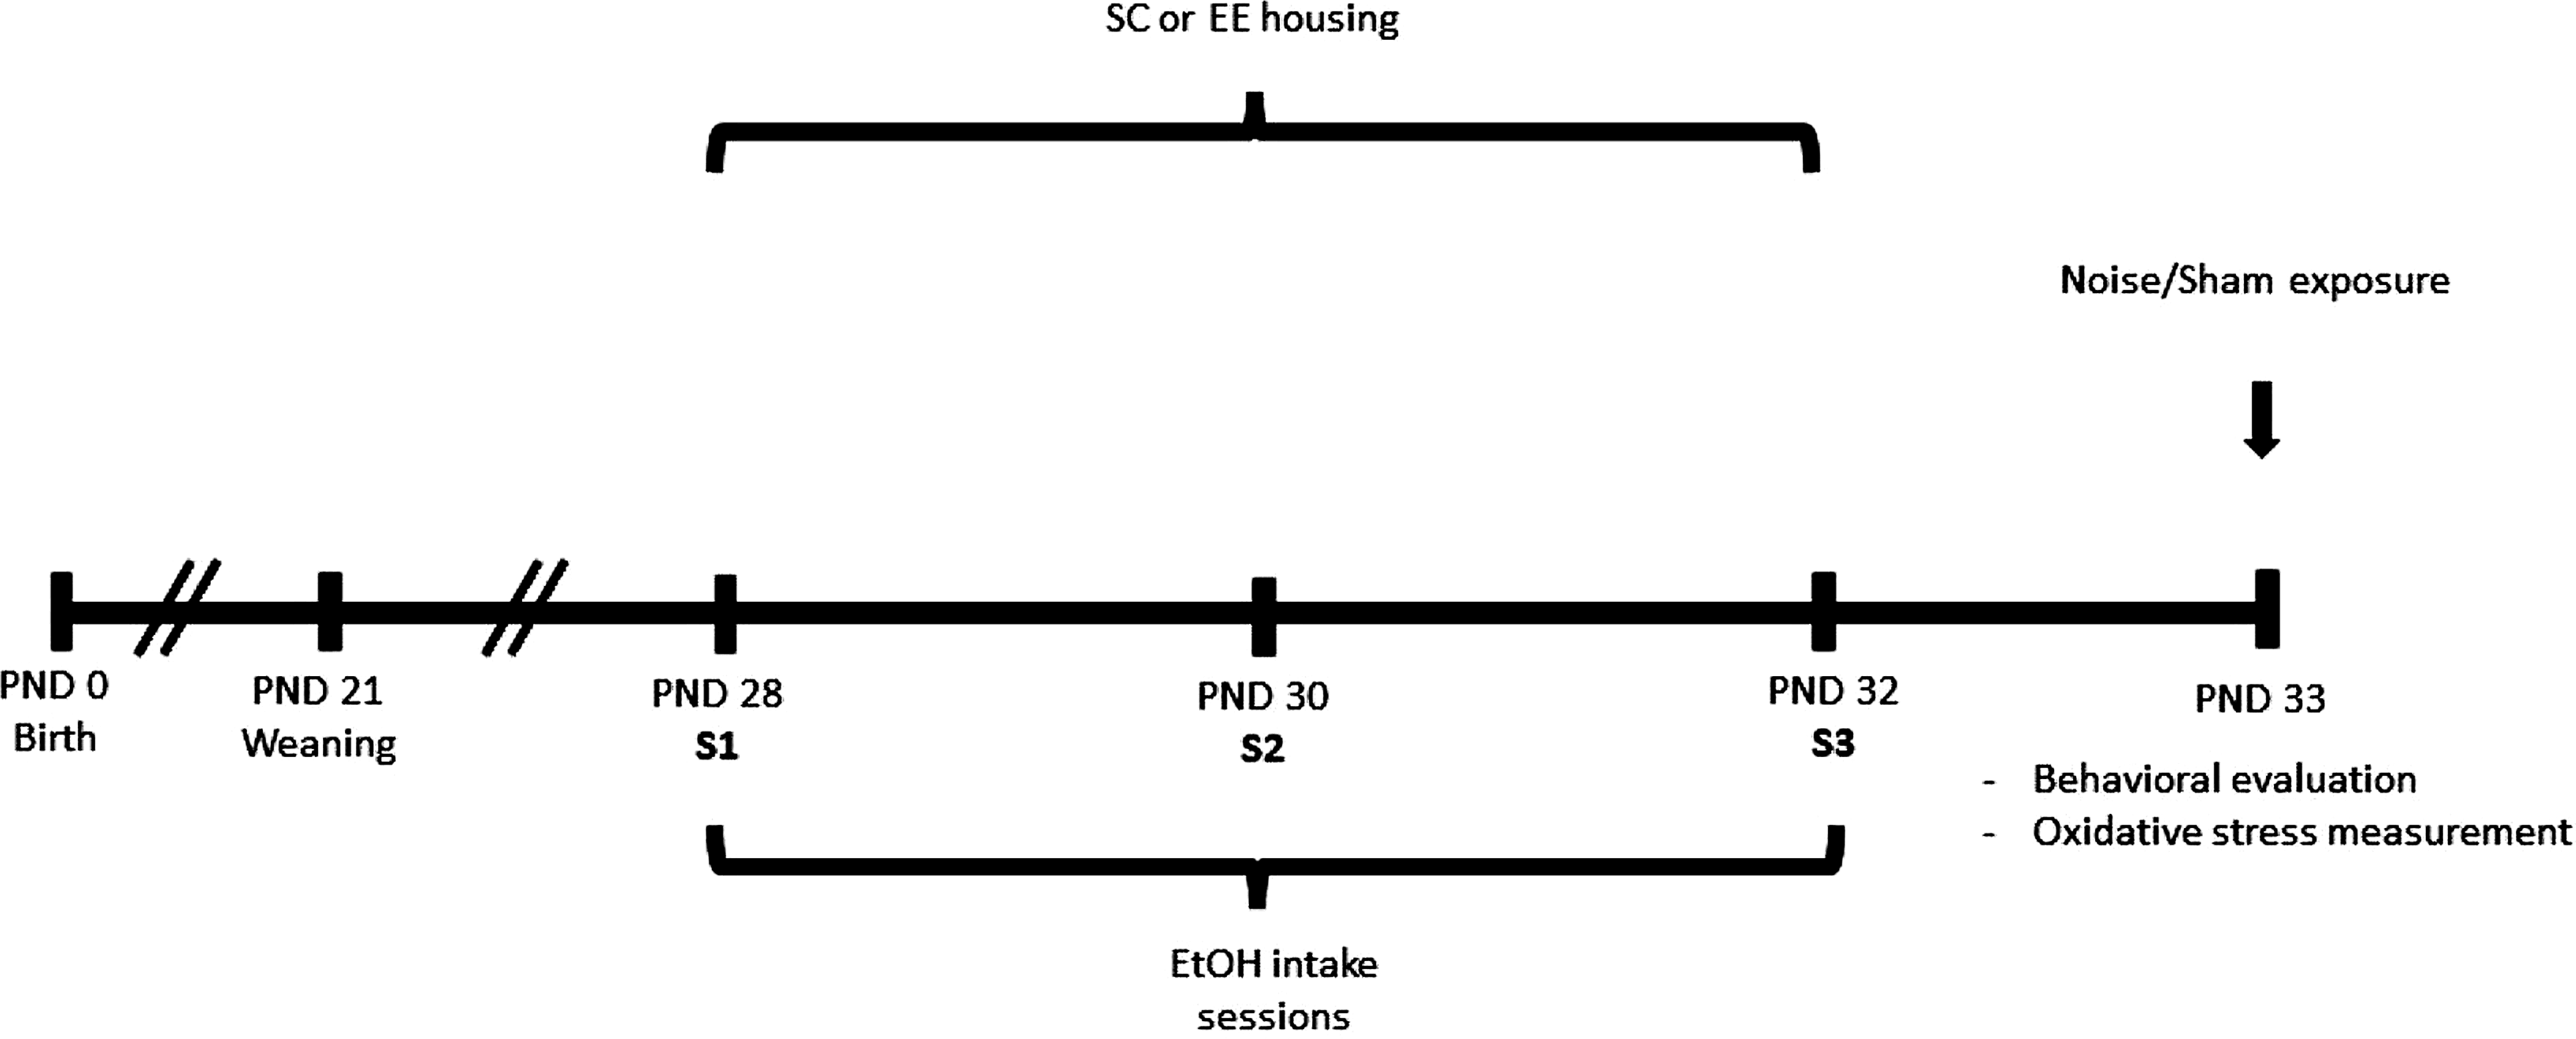 Assessment of Hippocampal-Related Behavioral Changes in Adolescent Rats of both Sexes Following Voluntary Intermittent Ethanol Intake and Noise Exposure: A Putative Underlying Mechanism and Implementation of a Non-pharmacological Preventive Strategy